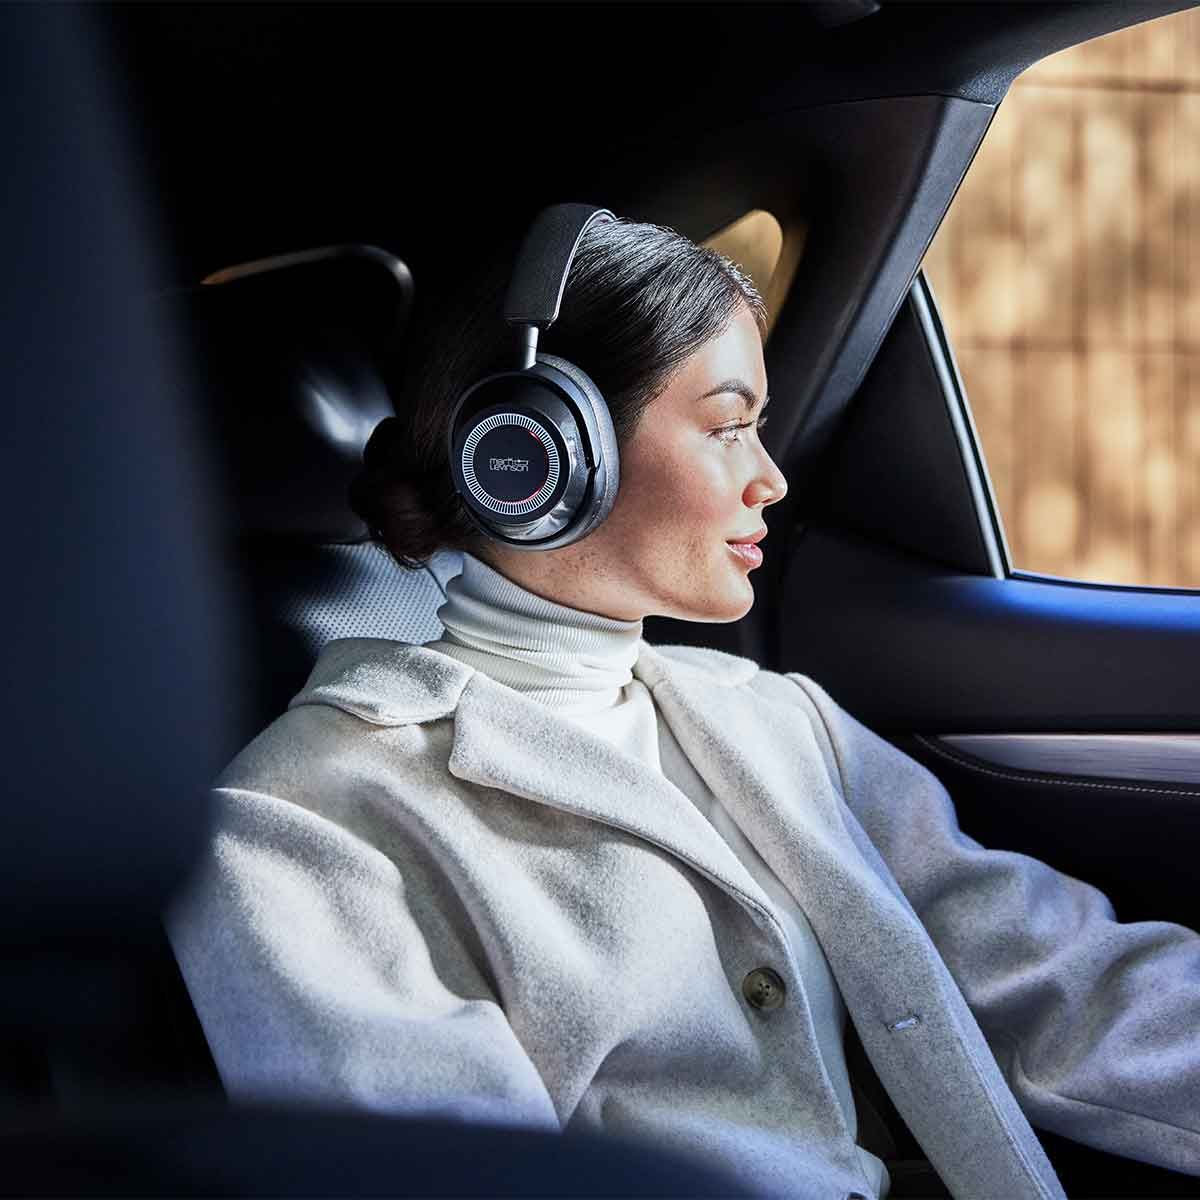 Female model wearing a pair of Mark Levinson № 5909 Premium Hi-Res Wireless ANC Over-Ear headphones in the pewter finish while riding passenger inside of a vehicle.